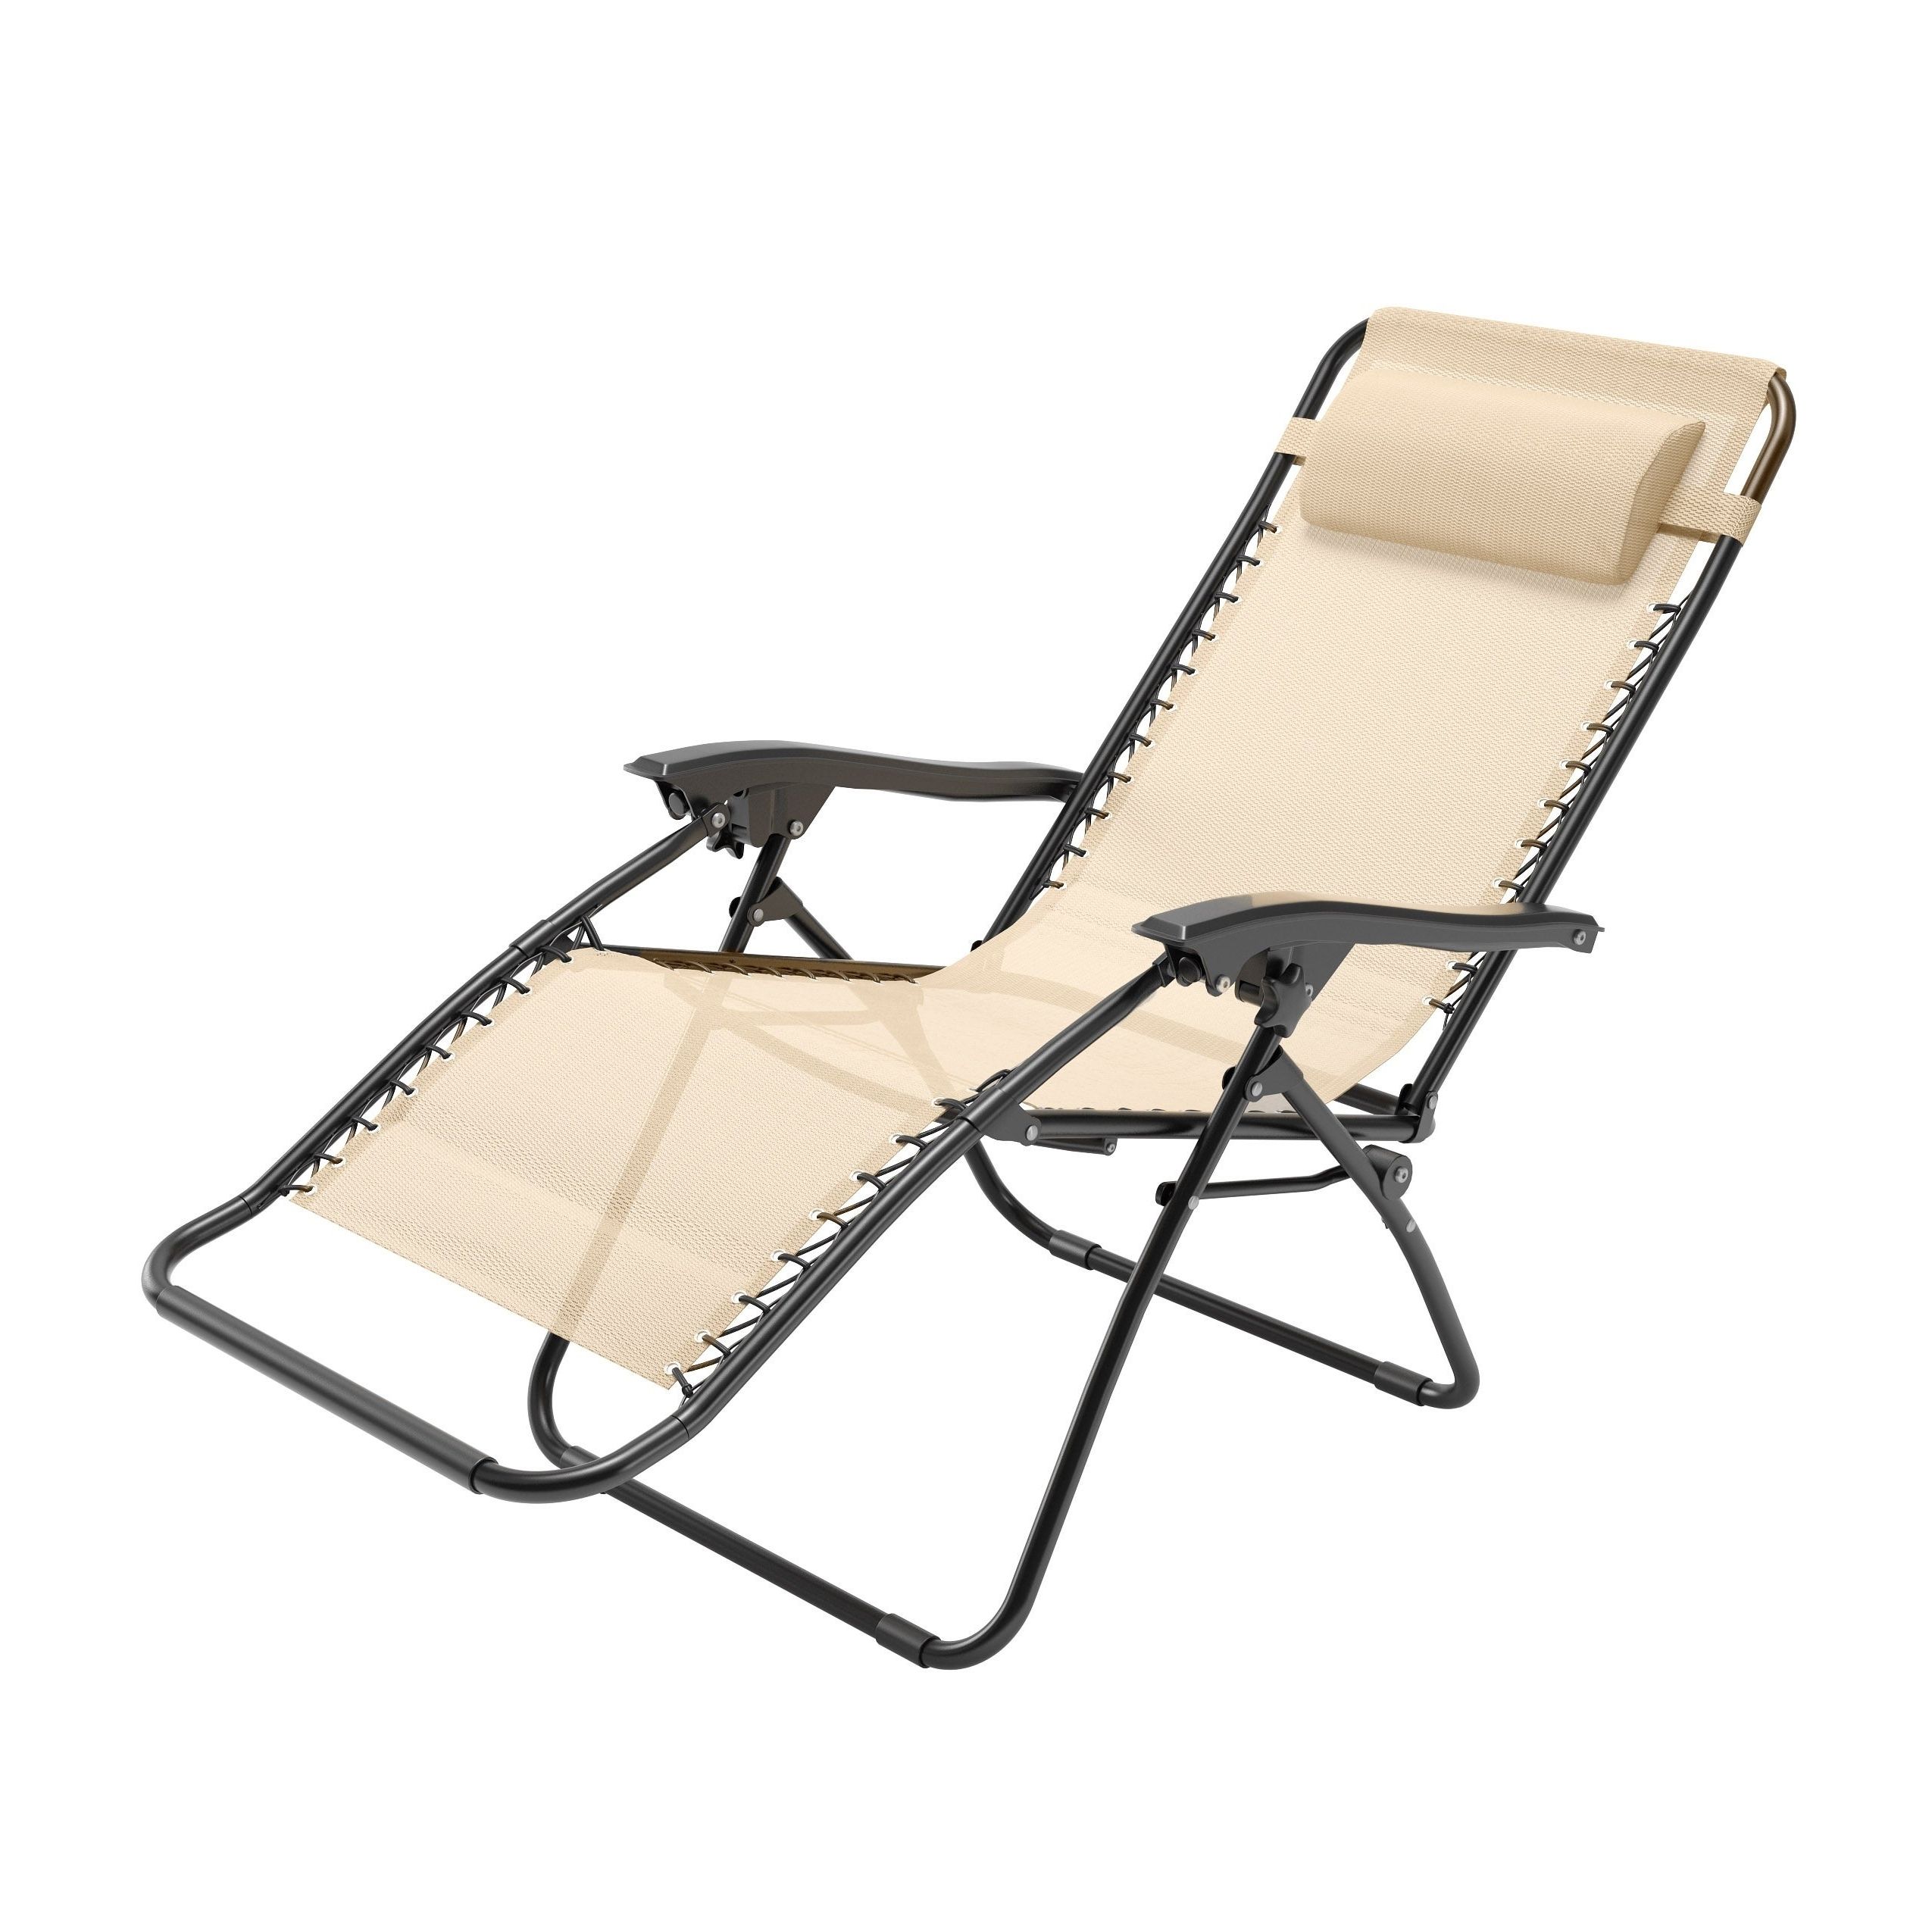 Famous Corliving Riverside Textured Loungers Regarding Corliving Riverside Textured Zero Gravity Lounger (View 1 of 25)